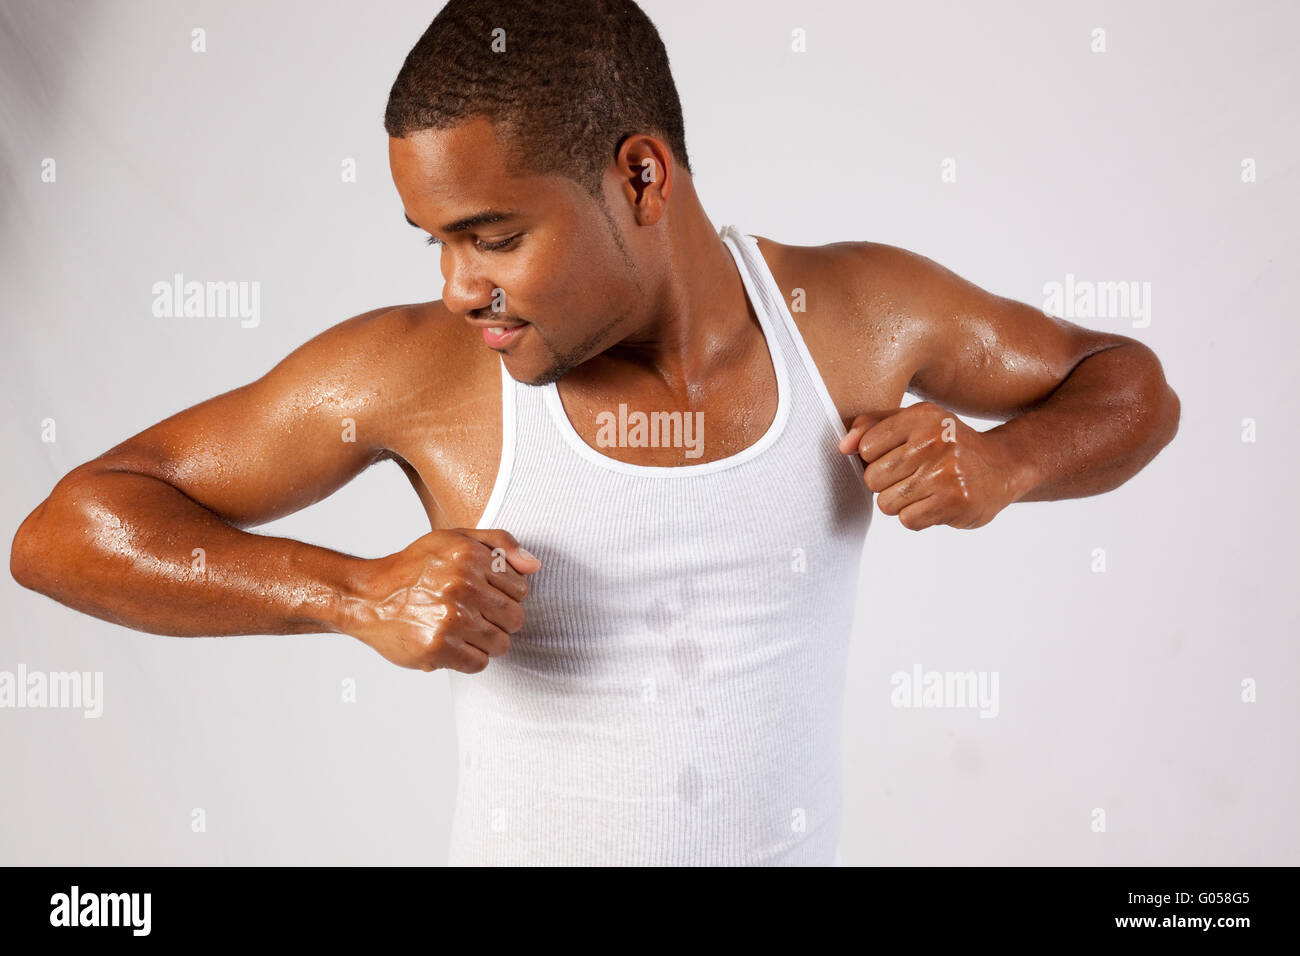 Handsome young black man flexing his muscles and looking focused Stock Photo